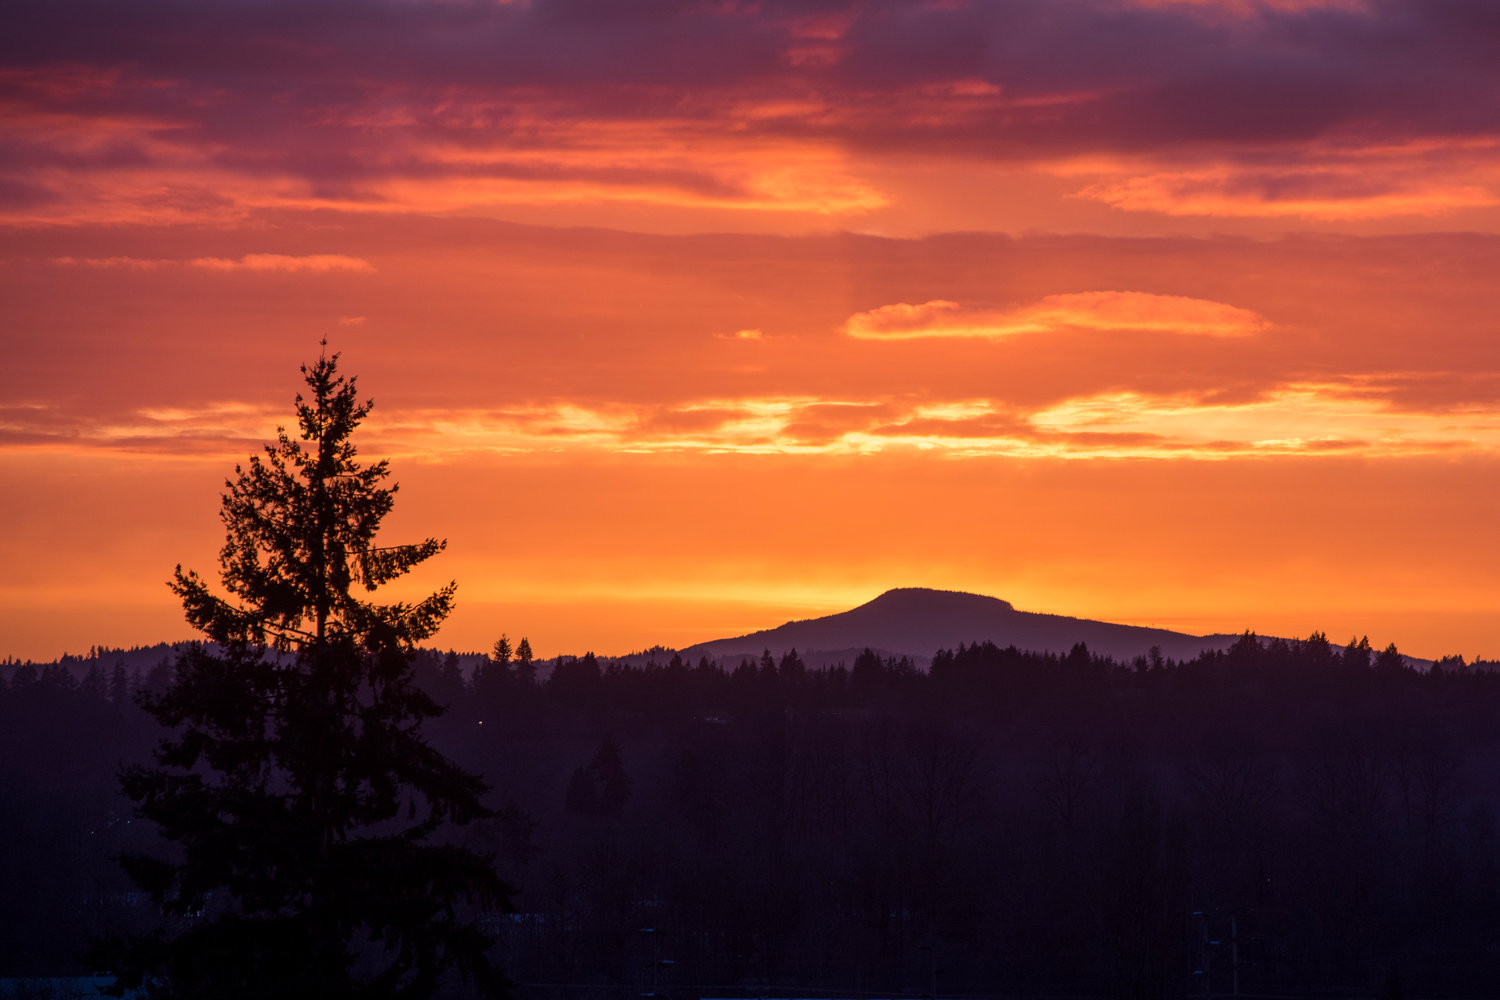 The sun sets over the Willapa Hills.